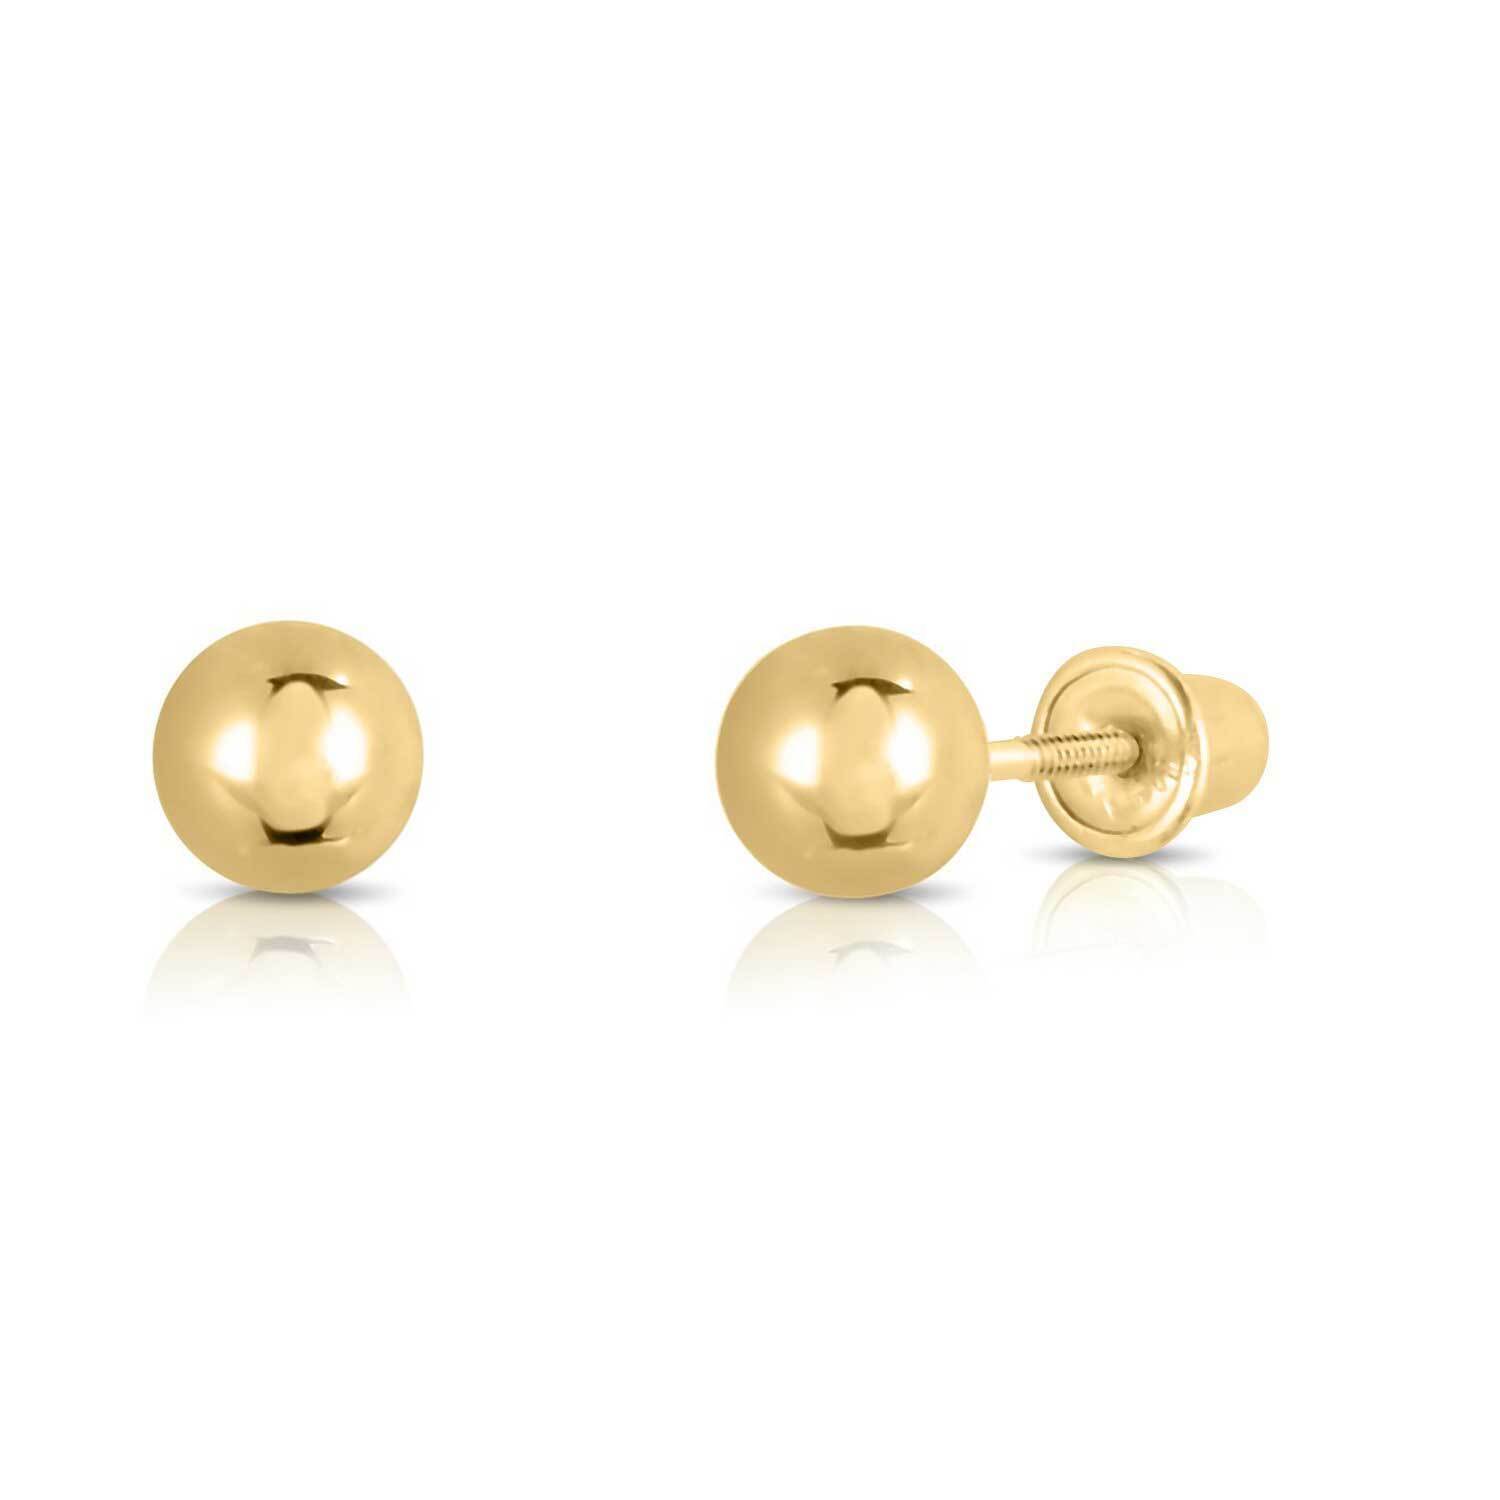 14K Real Solid Gold Round Ball Bead Sleeper Studs Earrings Screw-back 3-8mm